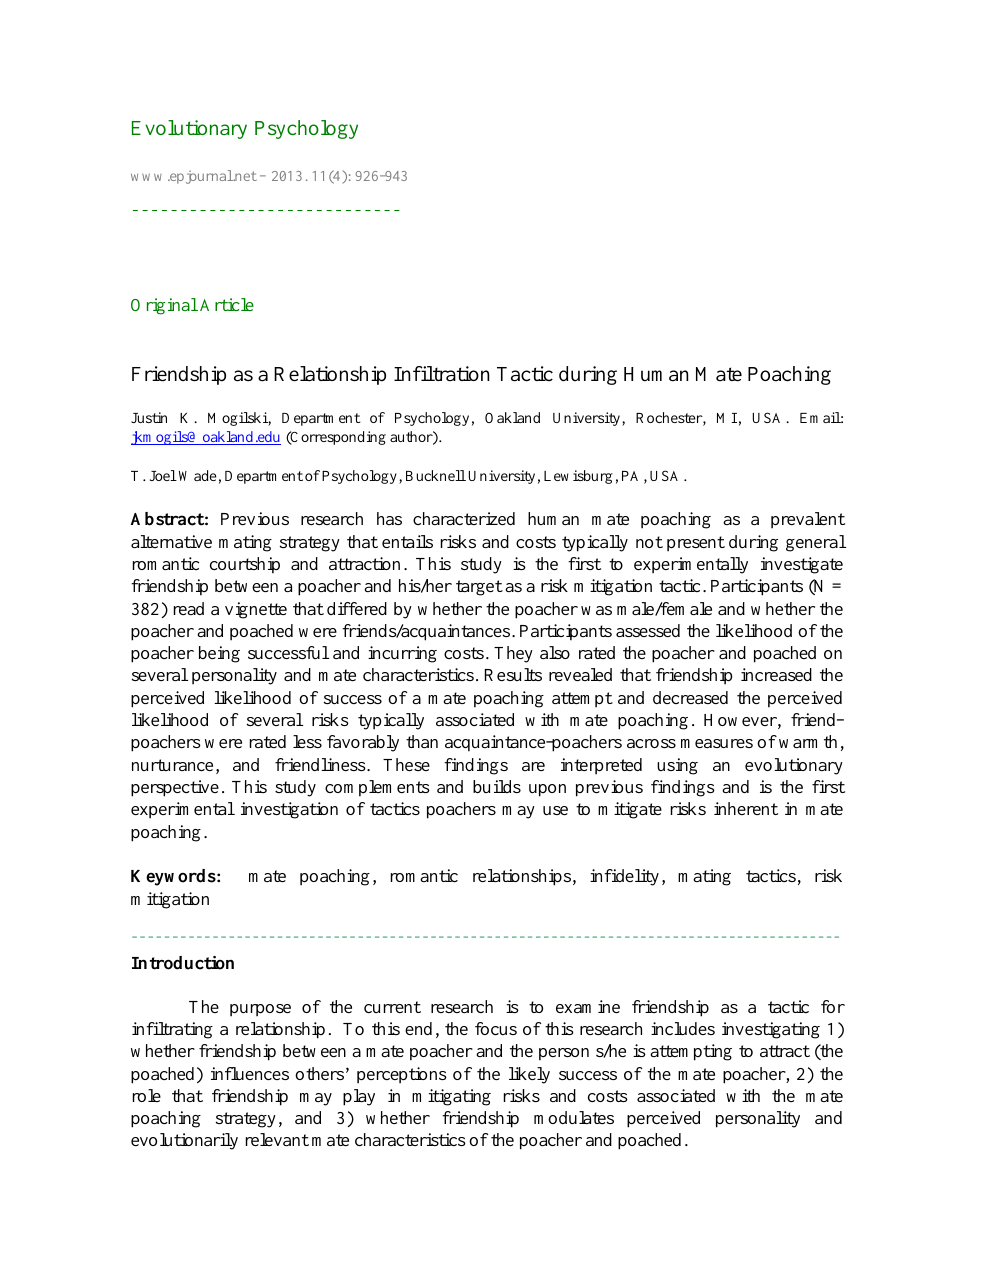 tyfoon Comorama botsen Friendship as a Relationship Infiltration Tactic during Human Mate Poaching  – topic of research paper in Psychology. Download scholarly article PDF and  read for free on CyberLeninka open science hub.